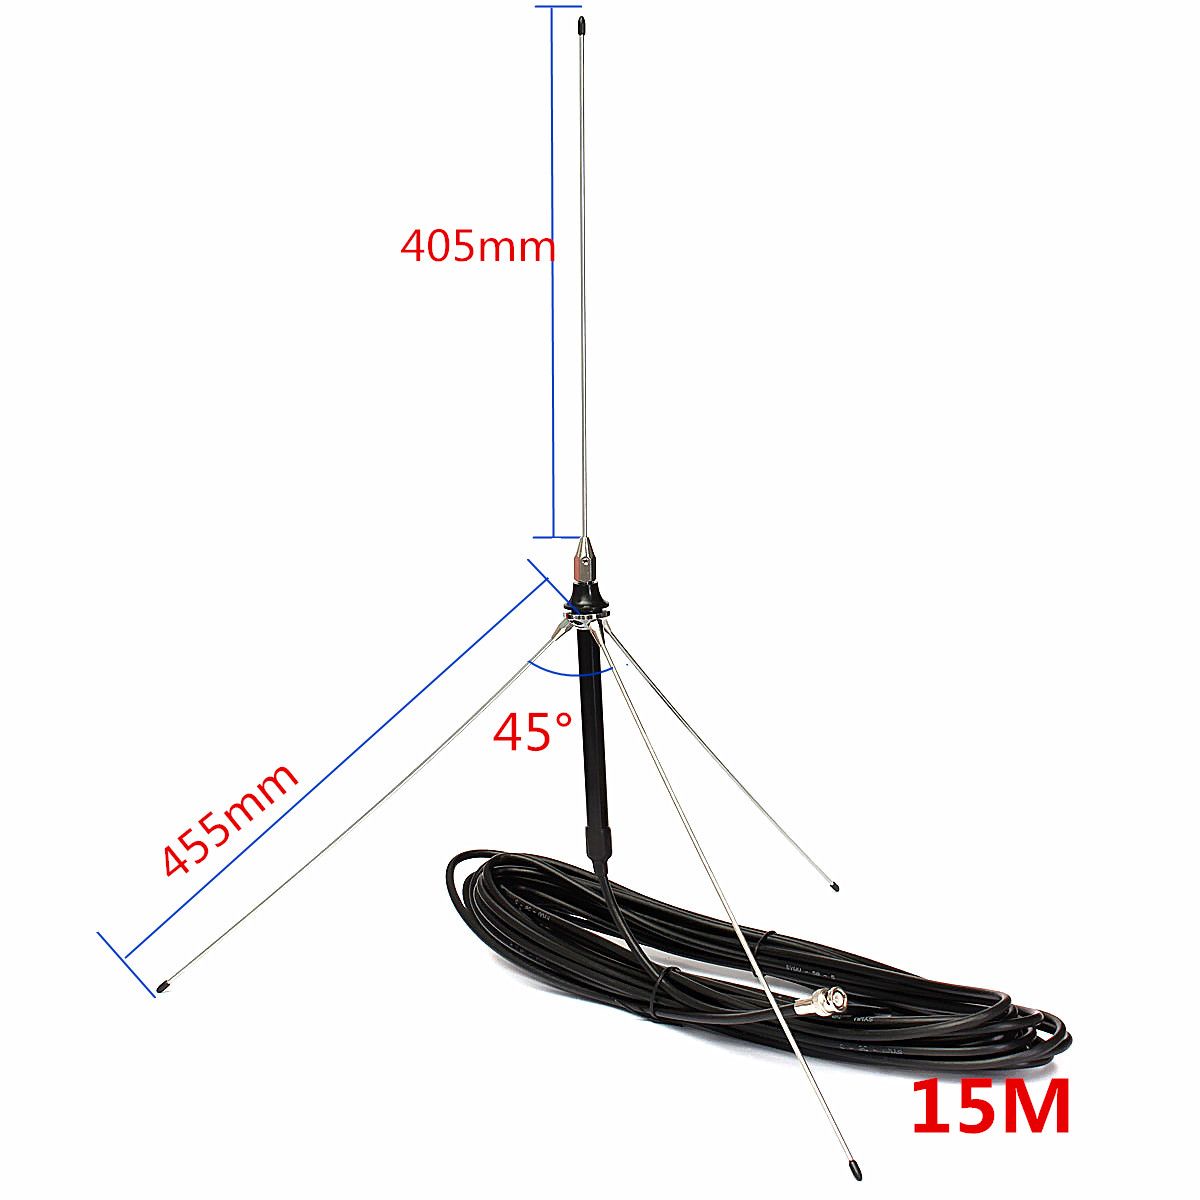 98Hz-VSWR-15-Professional-Stainless-Steel-FM-Transmitter-14-GP-Outdoor-Antenna-with-15M-Cable-1001516